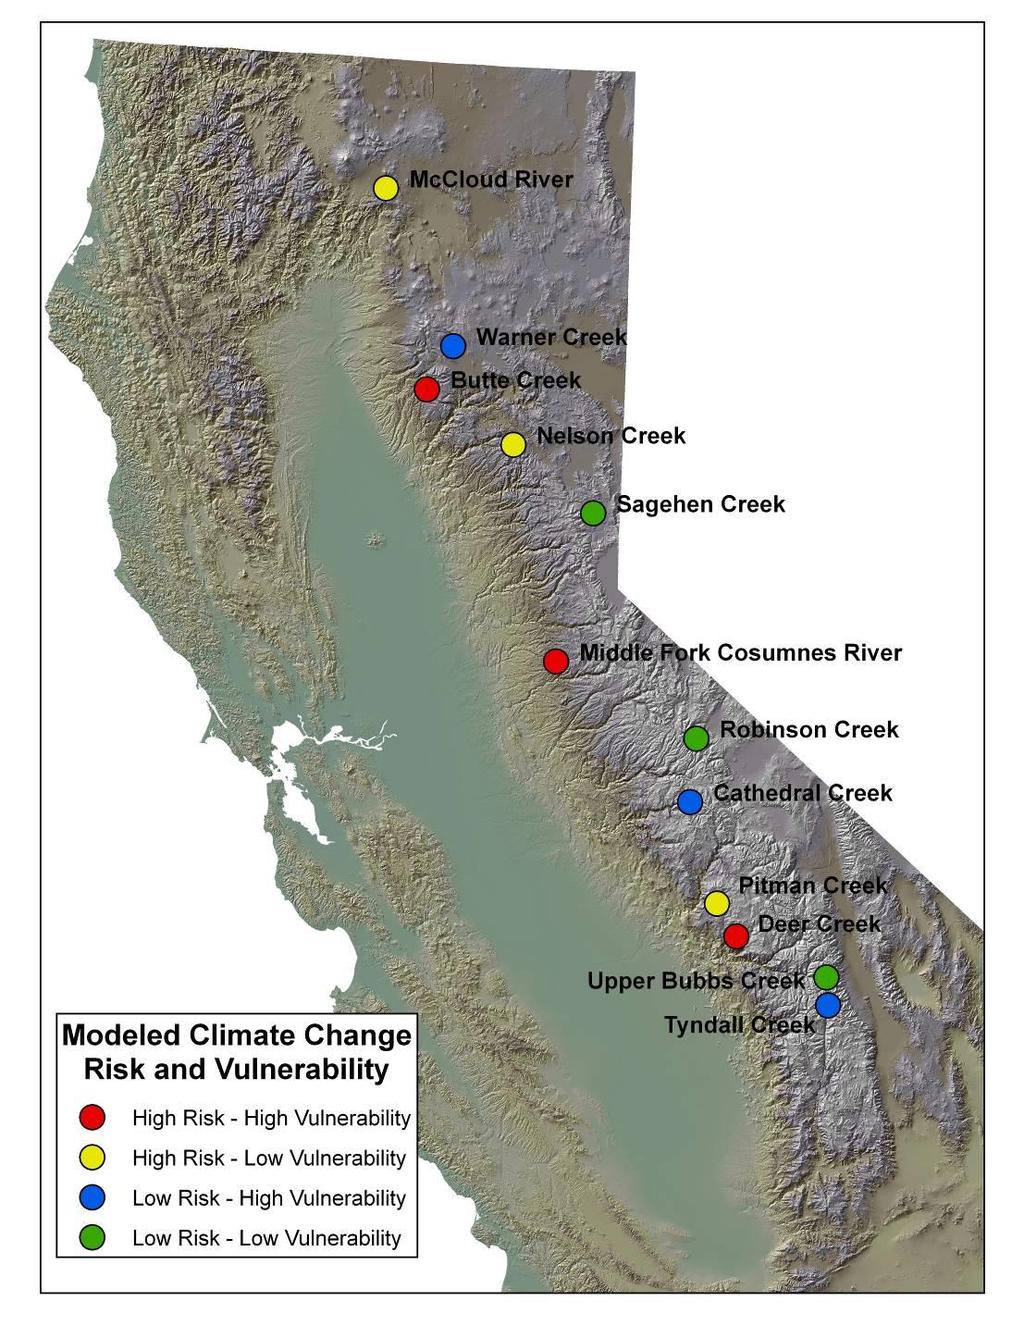 12 catchments 24 streams total (tributary site nested in each catchment) Sentinel Monitoring Network for Sierra Nevada: from 2010-2015 so far >1200-3600 meter elevation range 17 in 7 National Forests